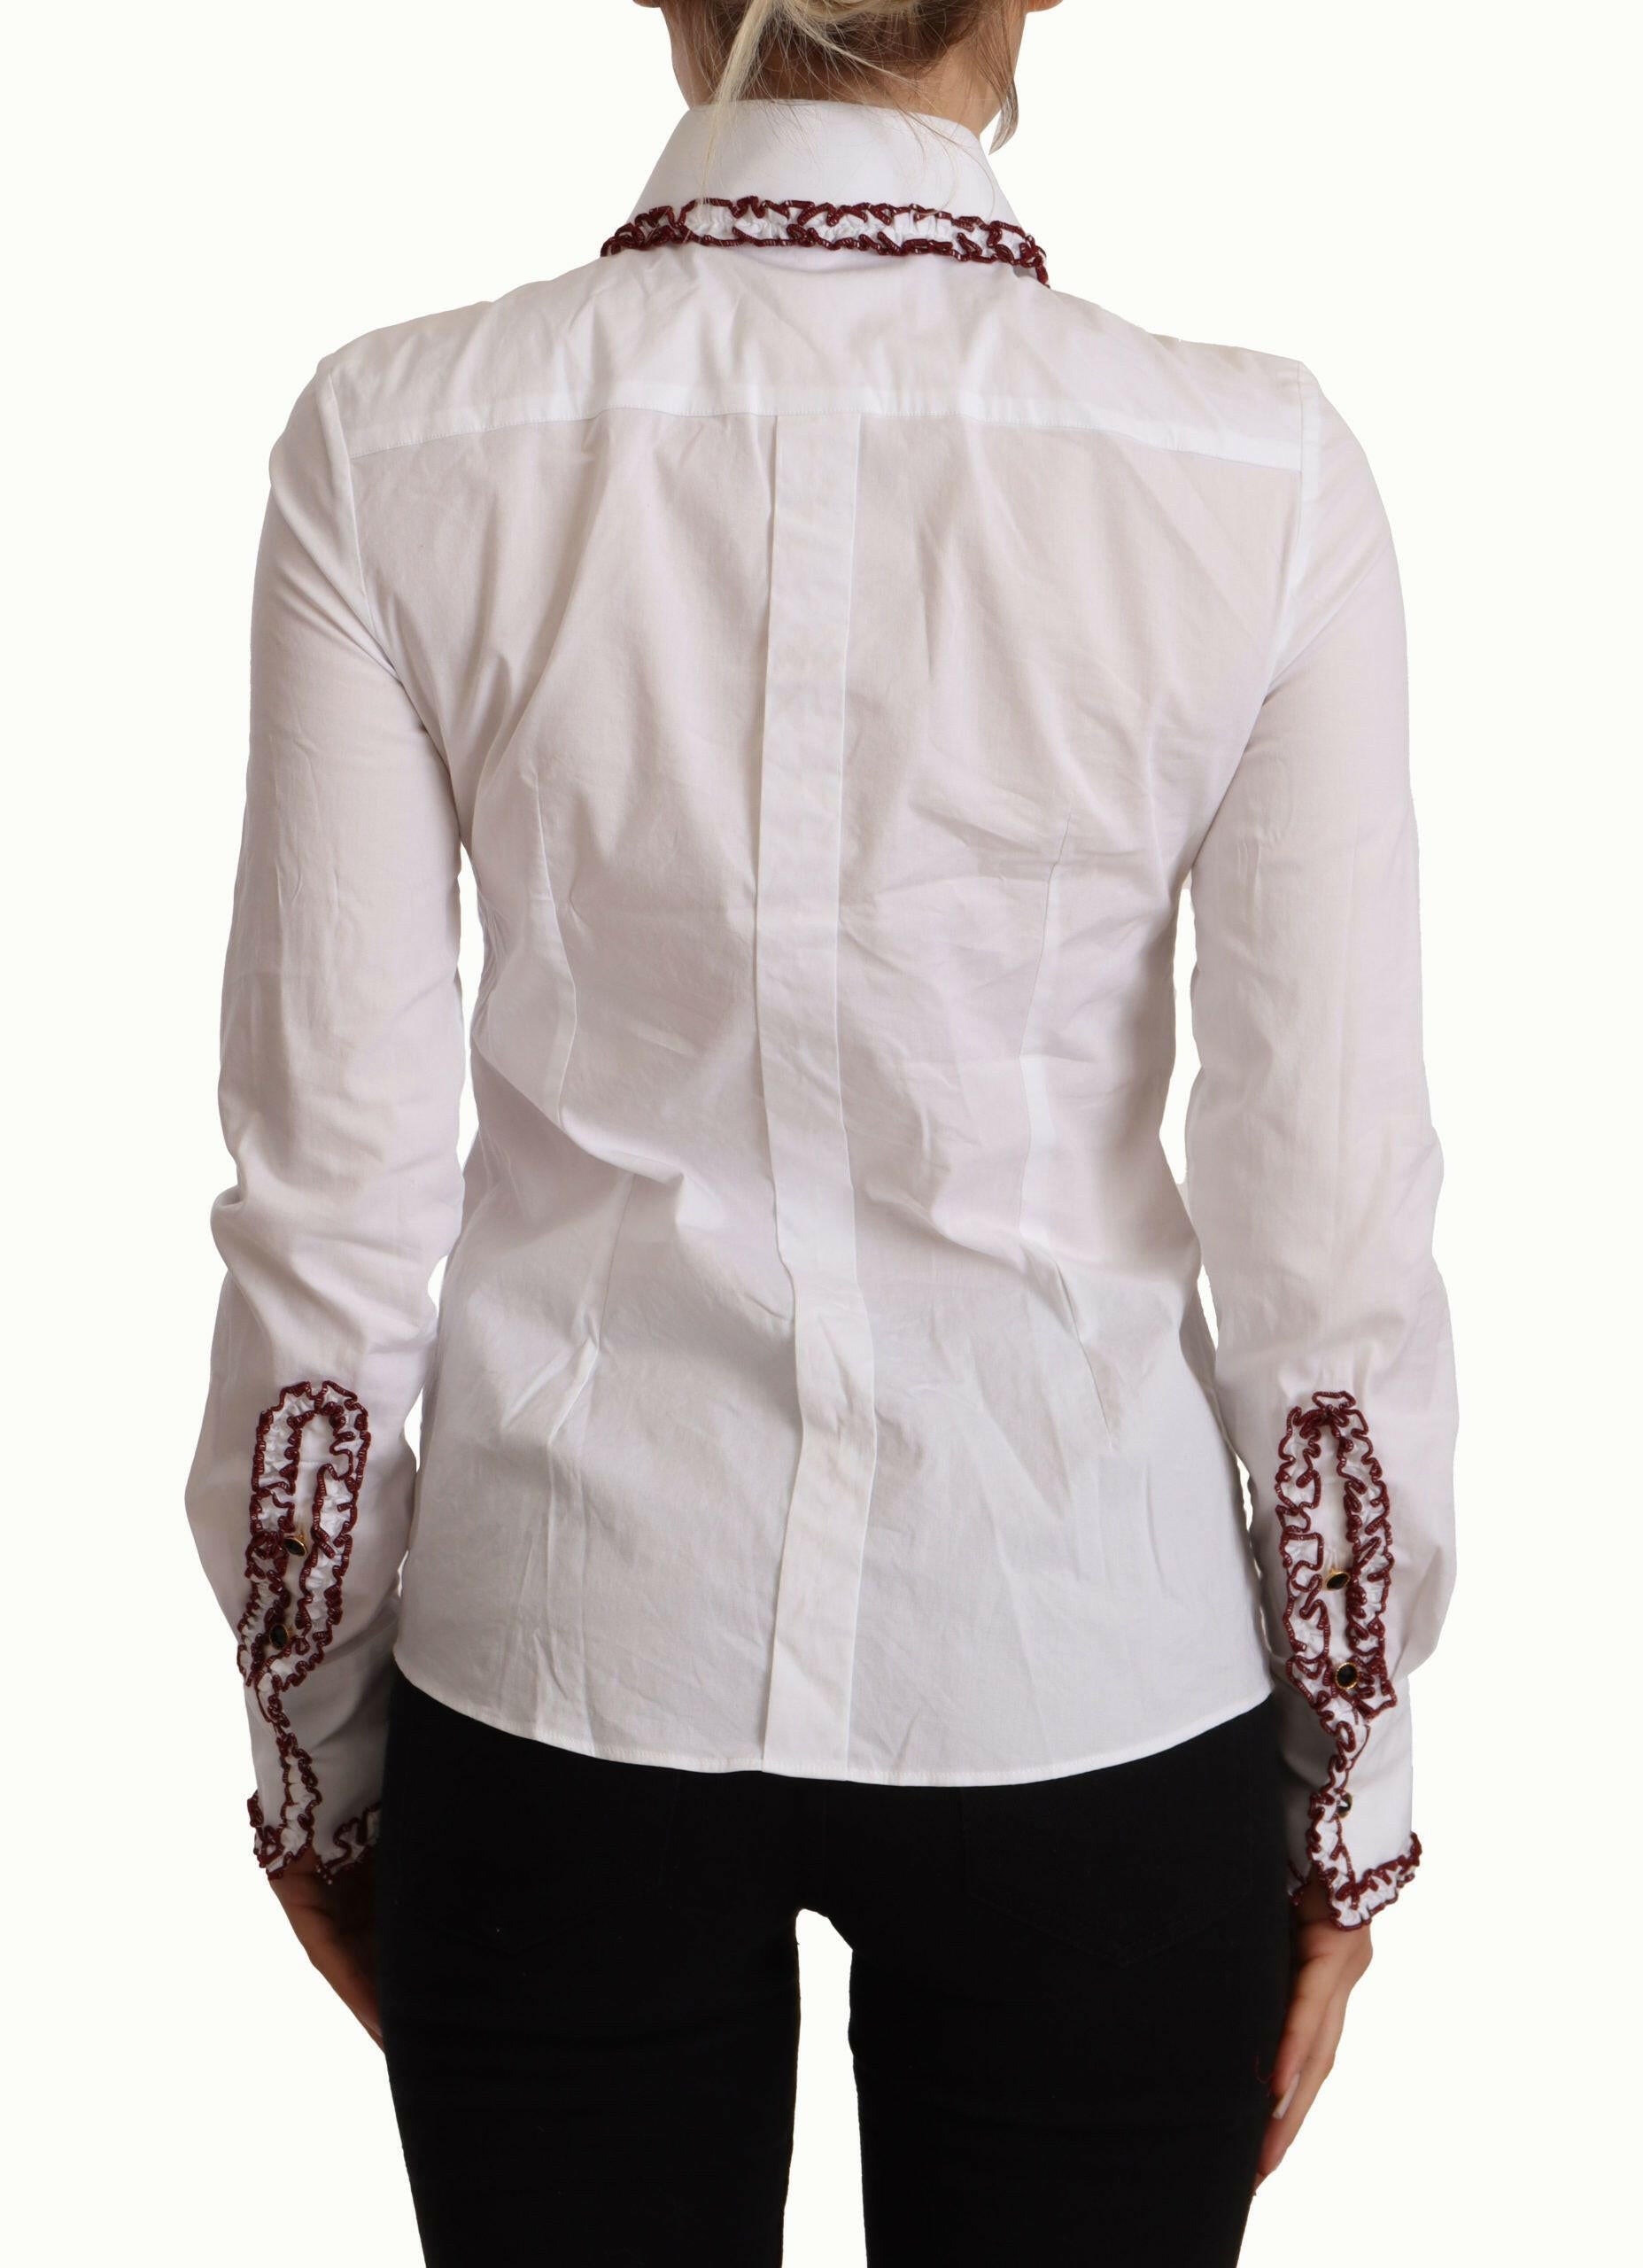 Dolce & Gabbana White Cotton Lace Long Sleeves Ruffle Collar Top Shirt - GENUINE AUTHENTIC BRAND LLC  